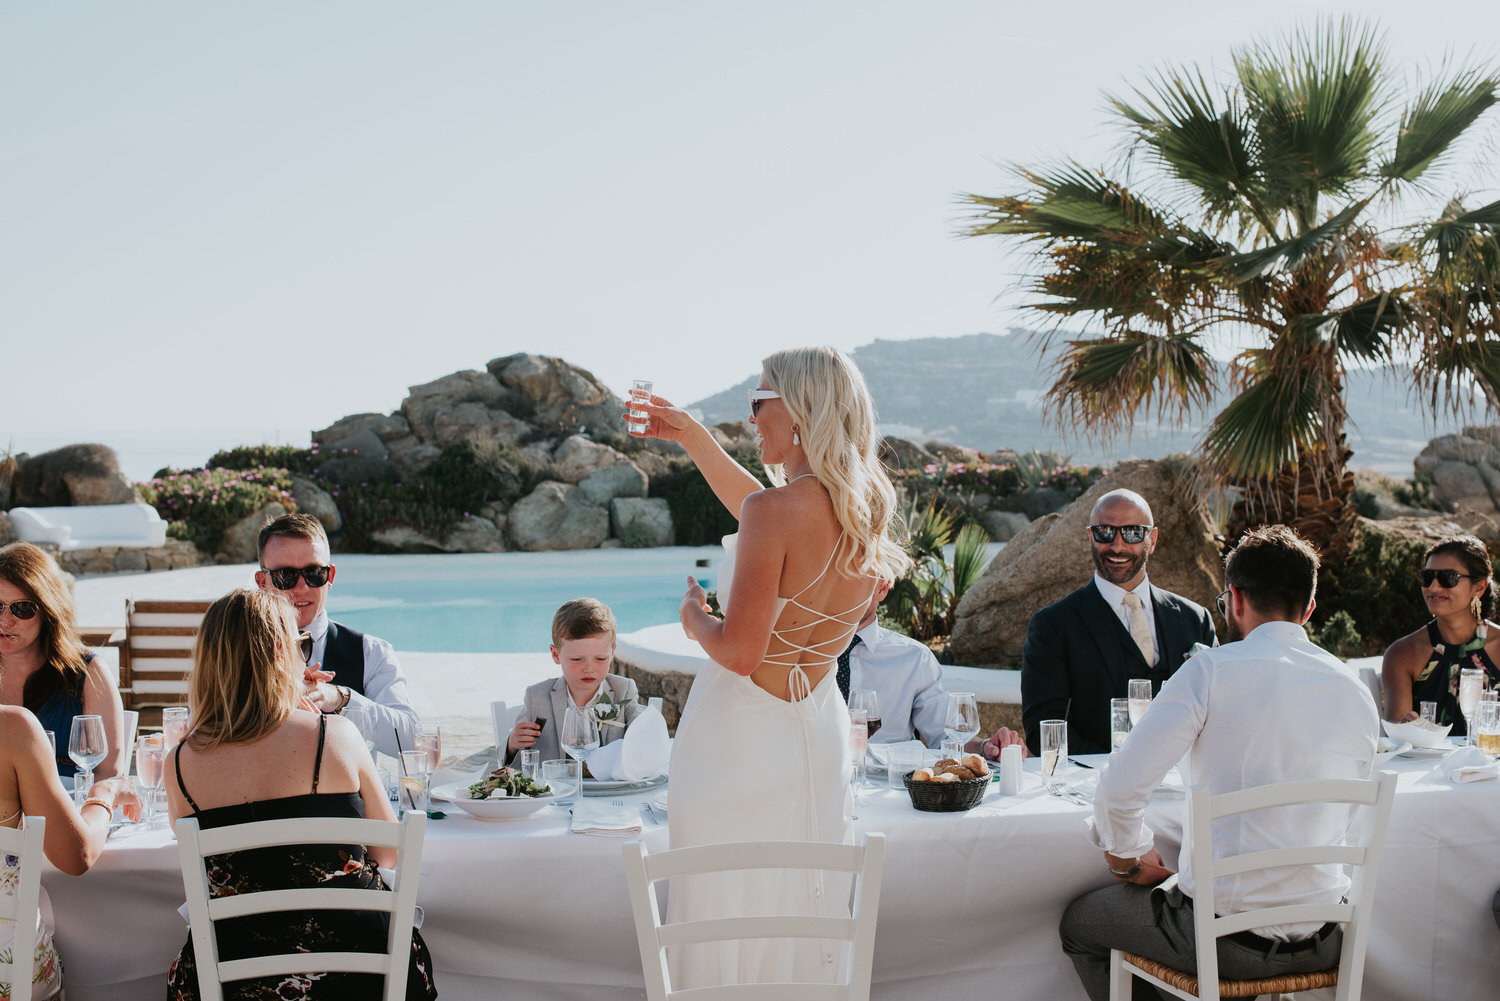 Mykonos wedding photographer: bride shot from behind raises a toast at the long reception table with guests smiling and palm tree in the background.